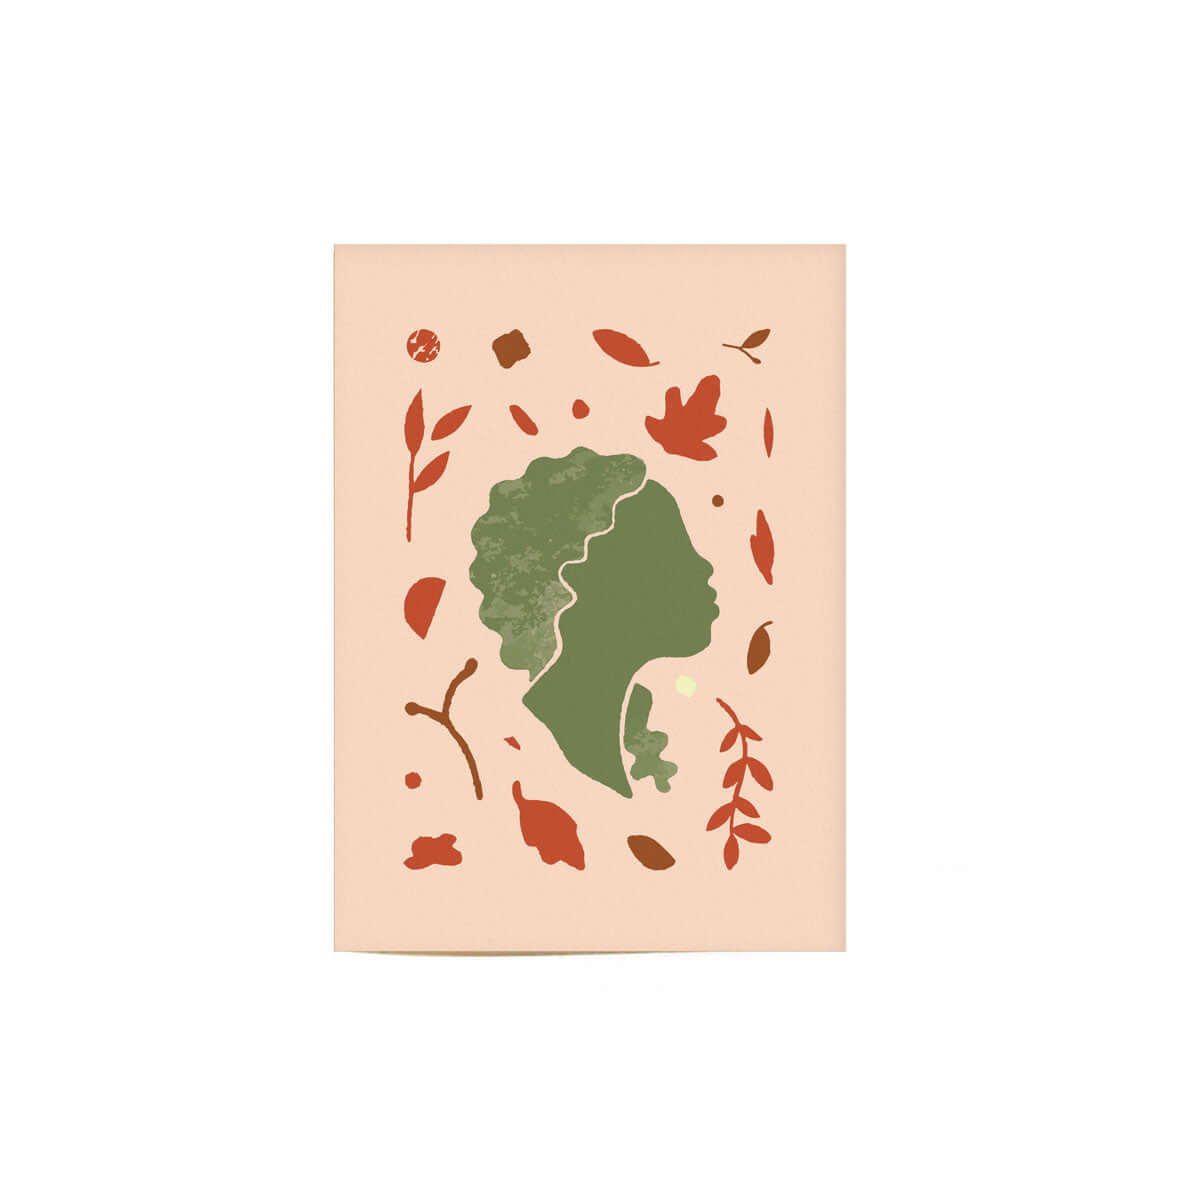 tan colored virgo greeting card with a green virgo illustration on the cover that represent a woman with leaf and branches decorative illustrations